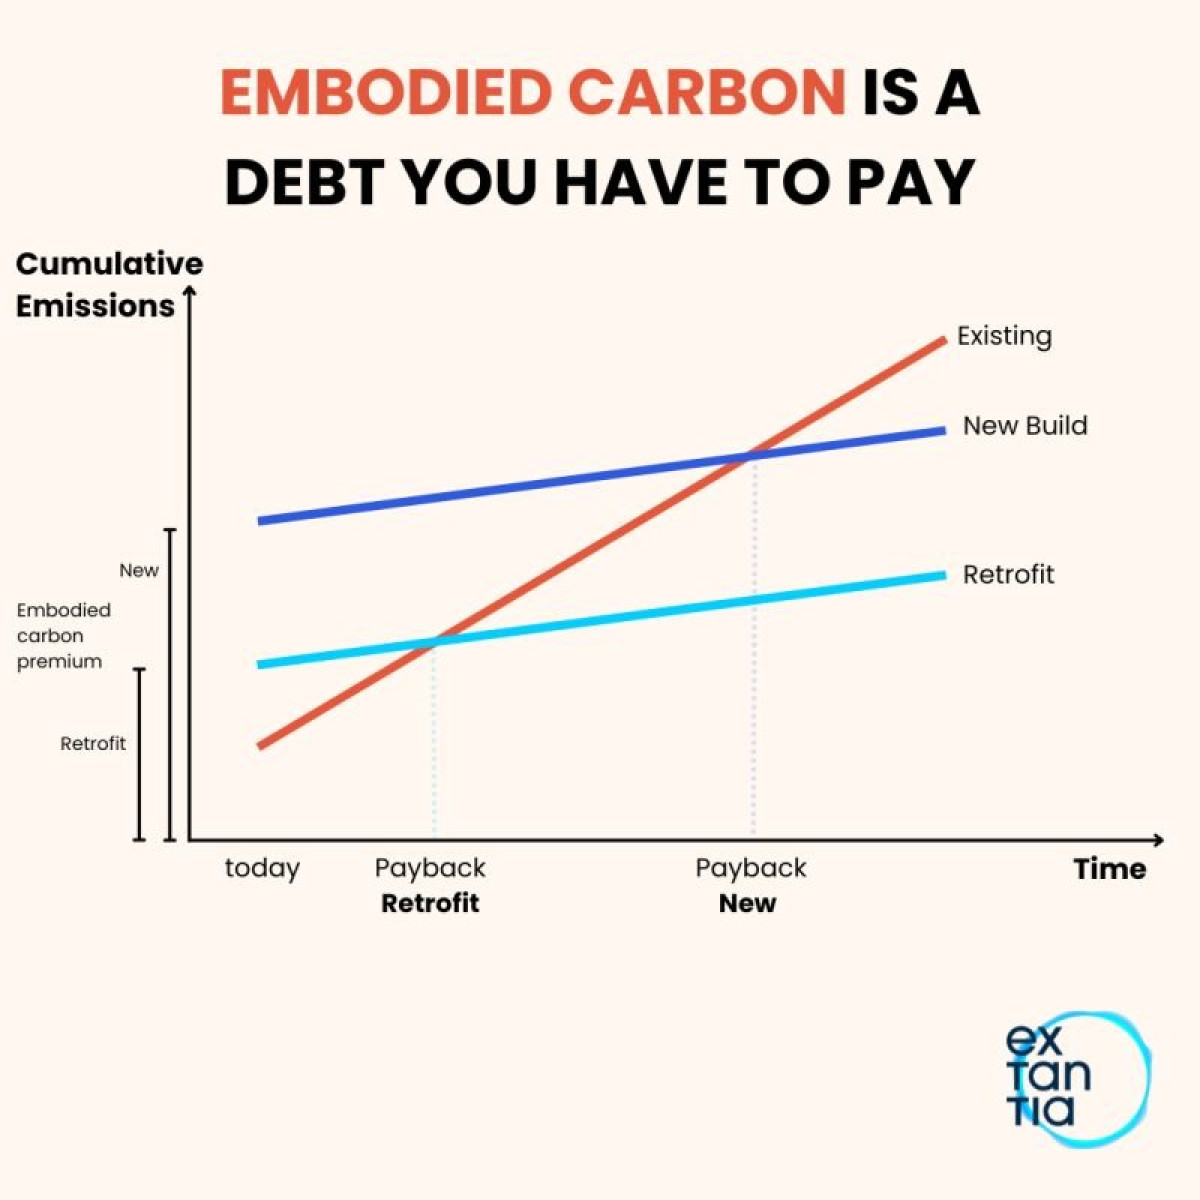 Embodied Carbon is a debt you have to pay